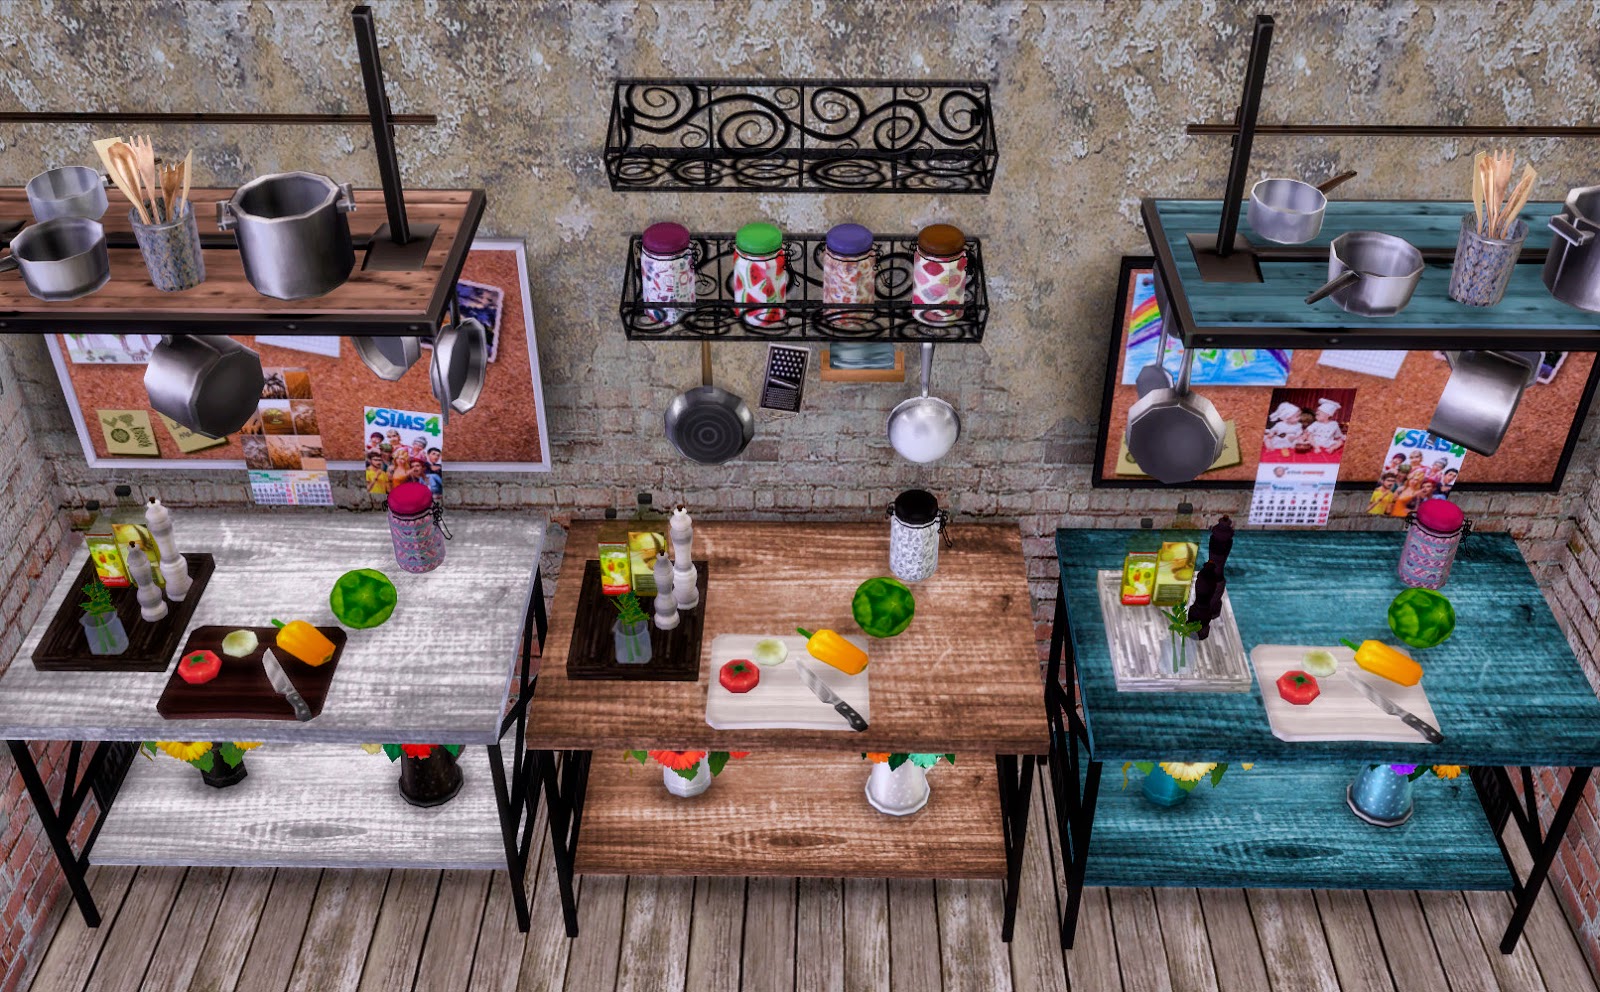 Urban Chic Clutter 2 Sims 4 Custom Content